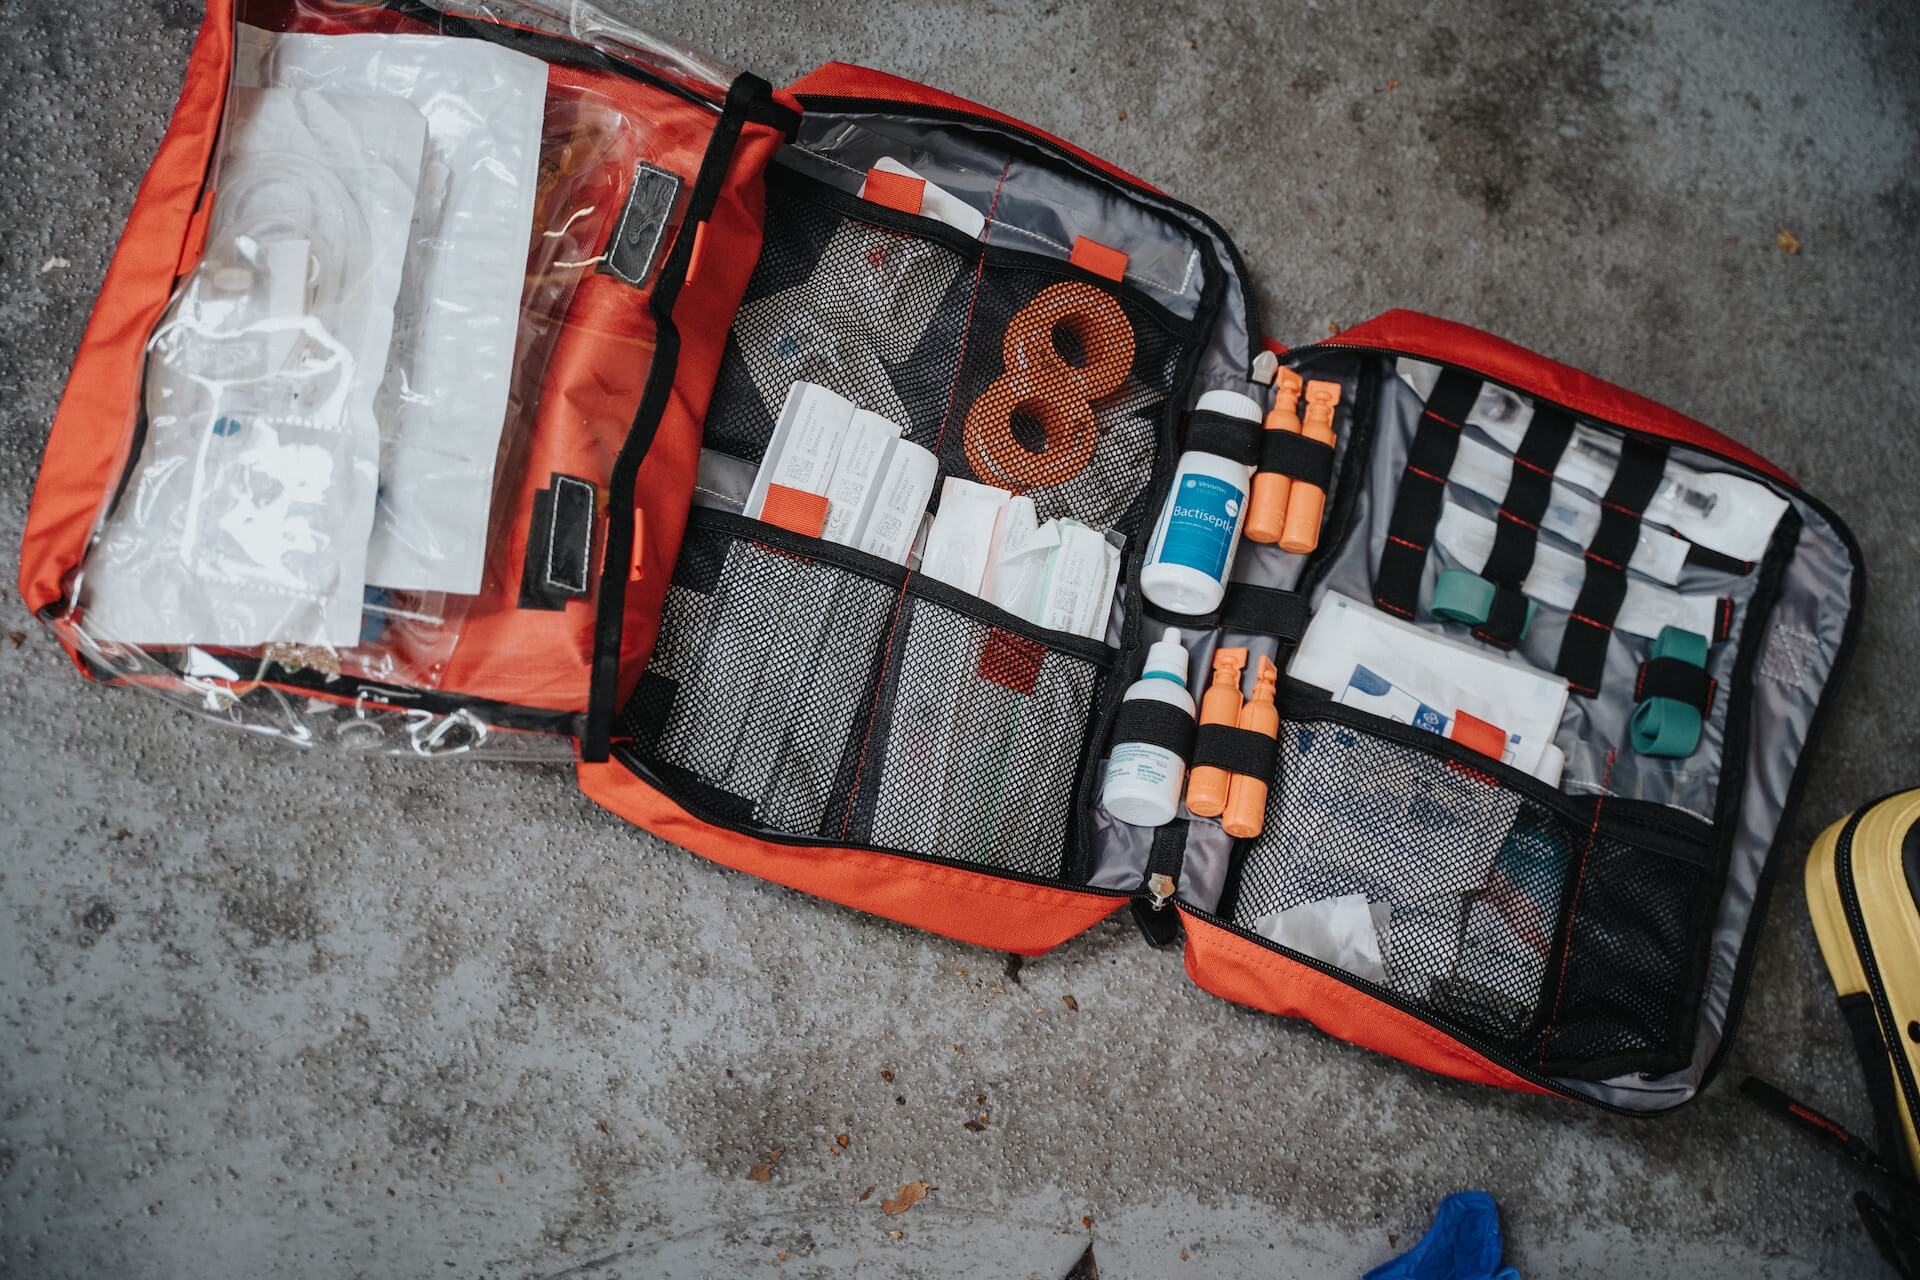 First Aid and Survival Kits for Any Adventure